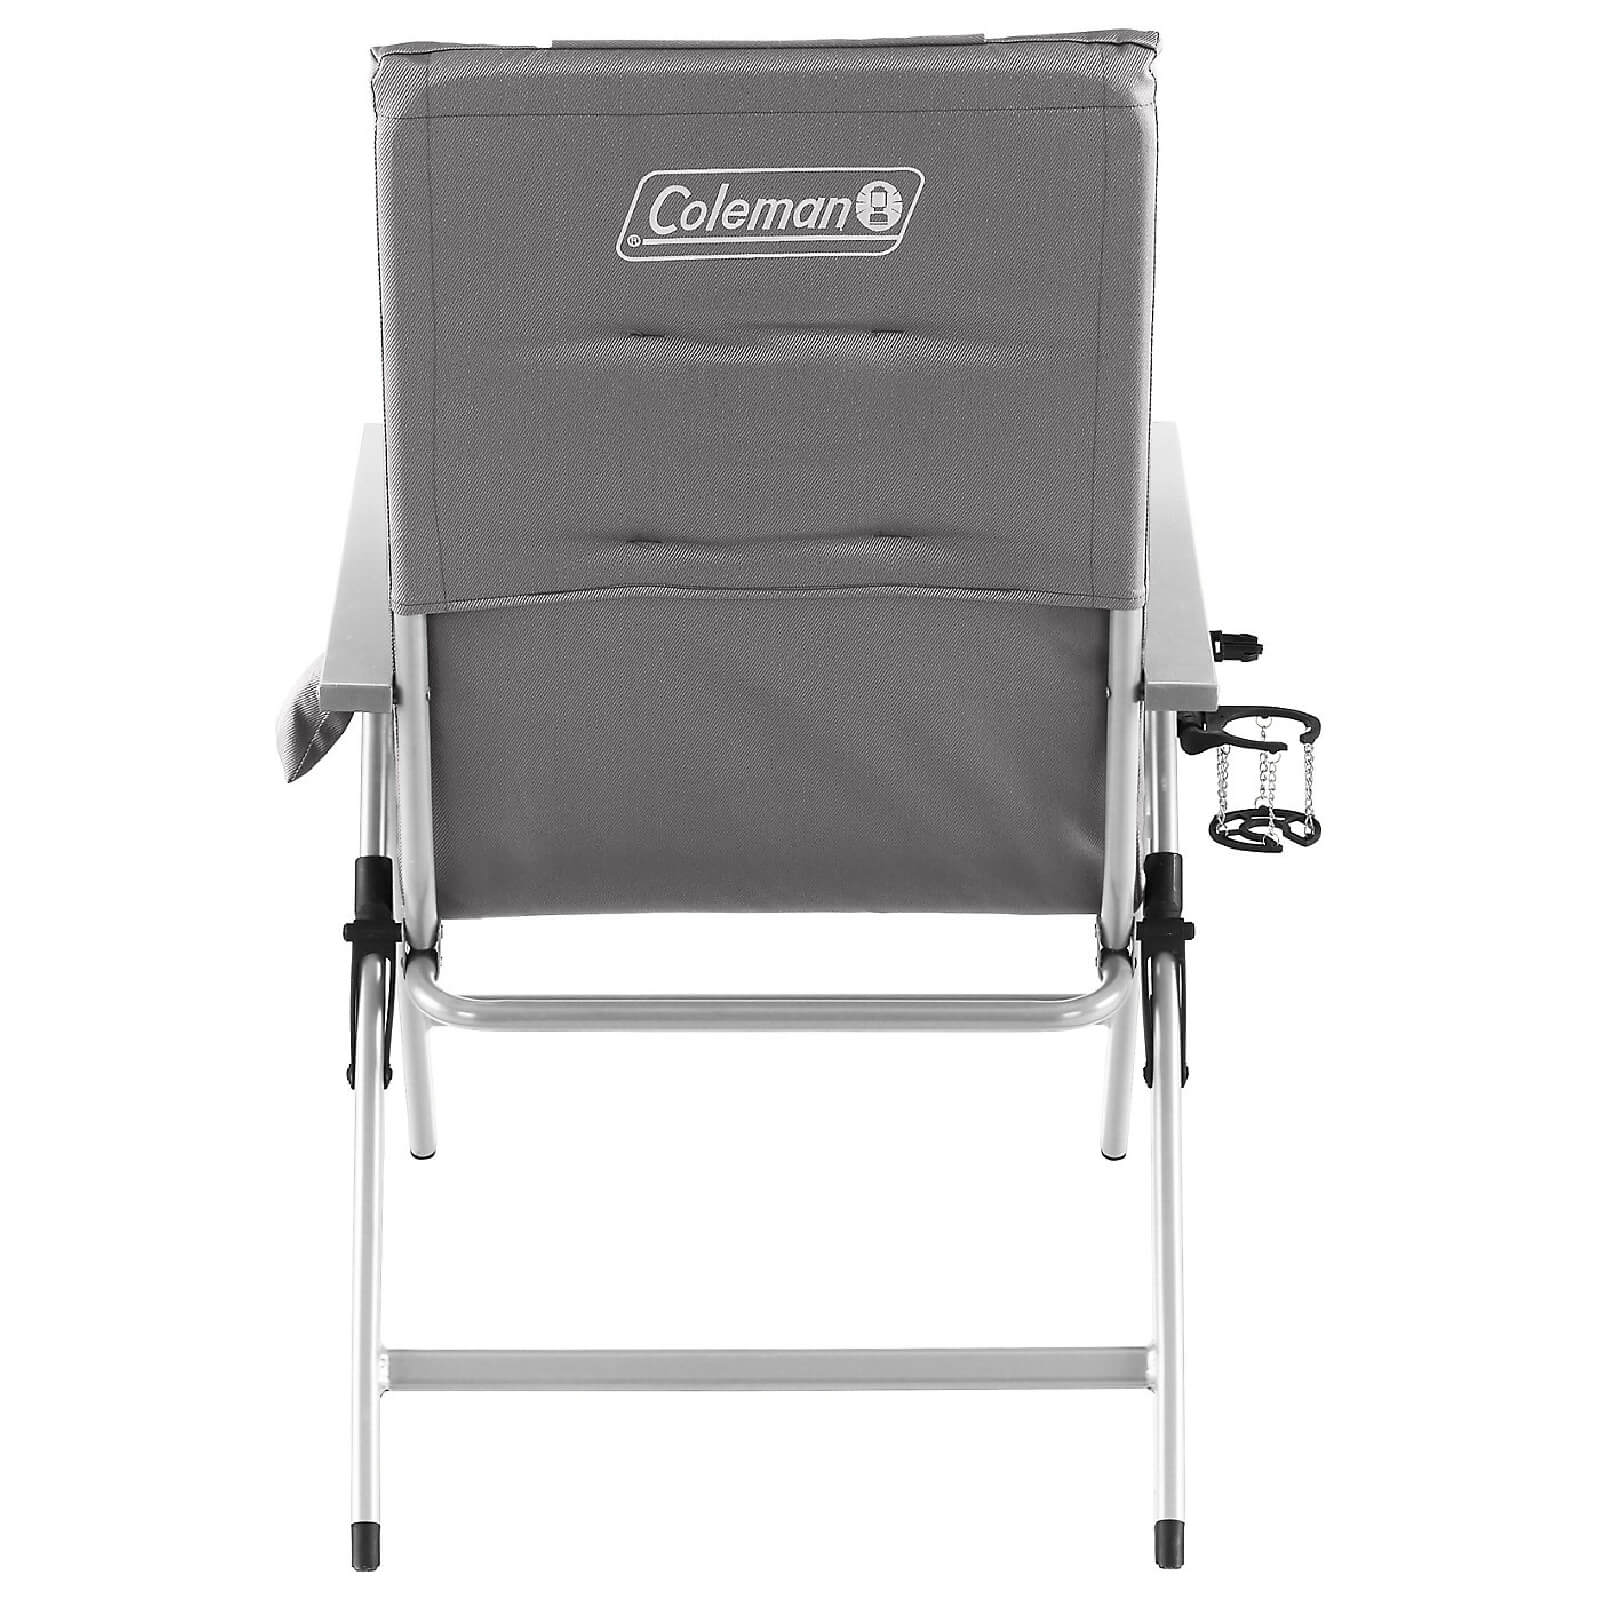 Camping Furniture Coleman 5 Position Padded Recliner Aluiminium Chair Alternate 1